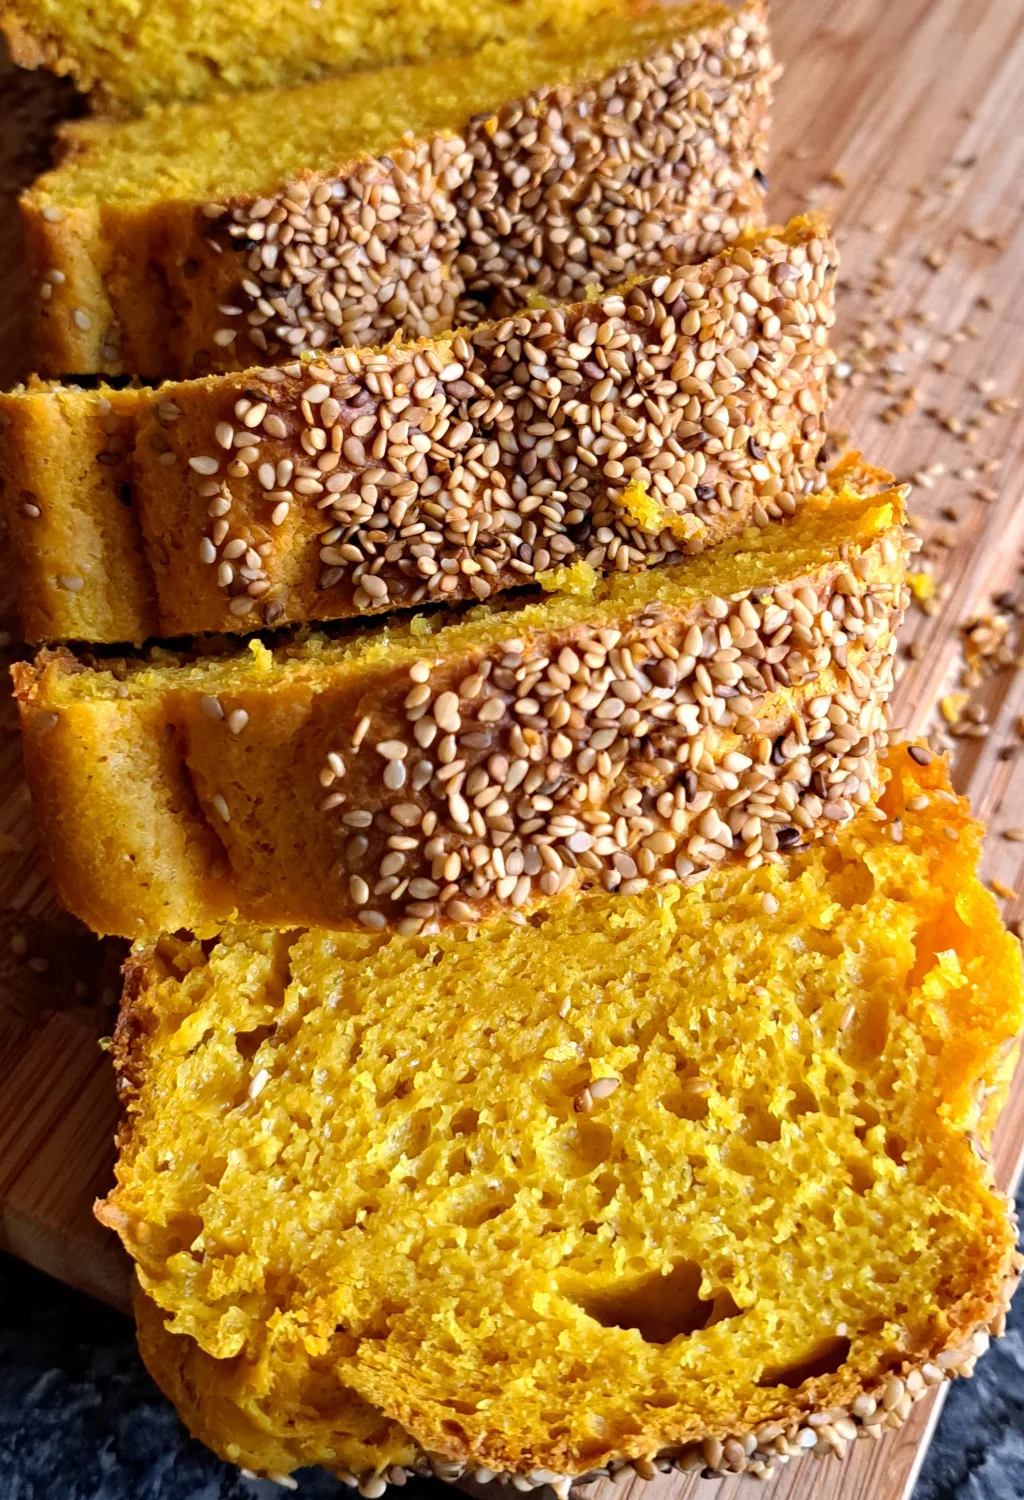 Freshly baked South African corn bread (also known as mielie bread) on a wooden cutting board sprinkled with sesame seeds.